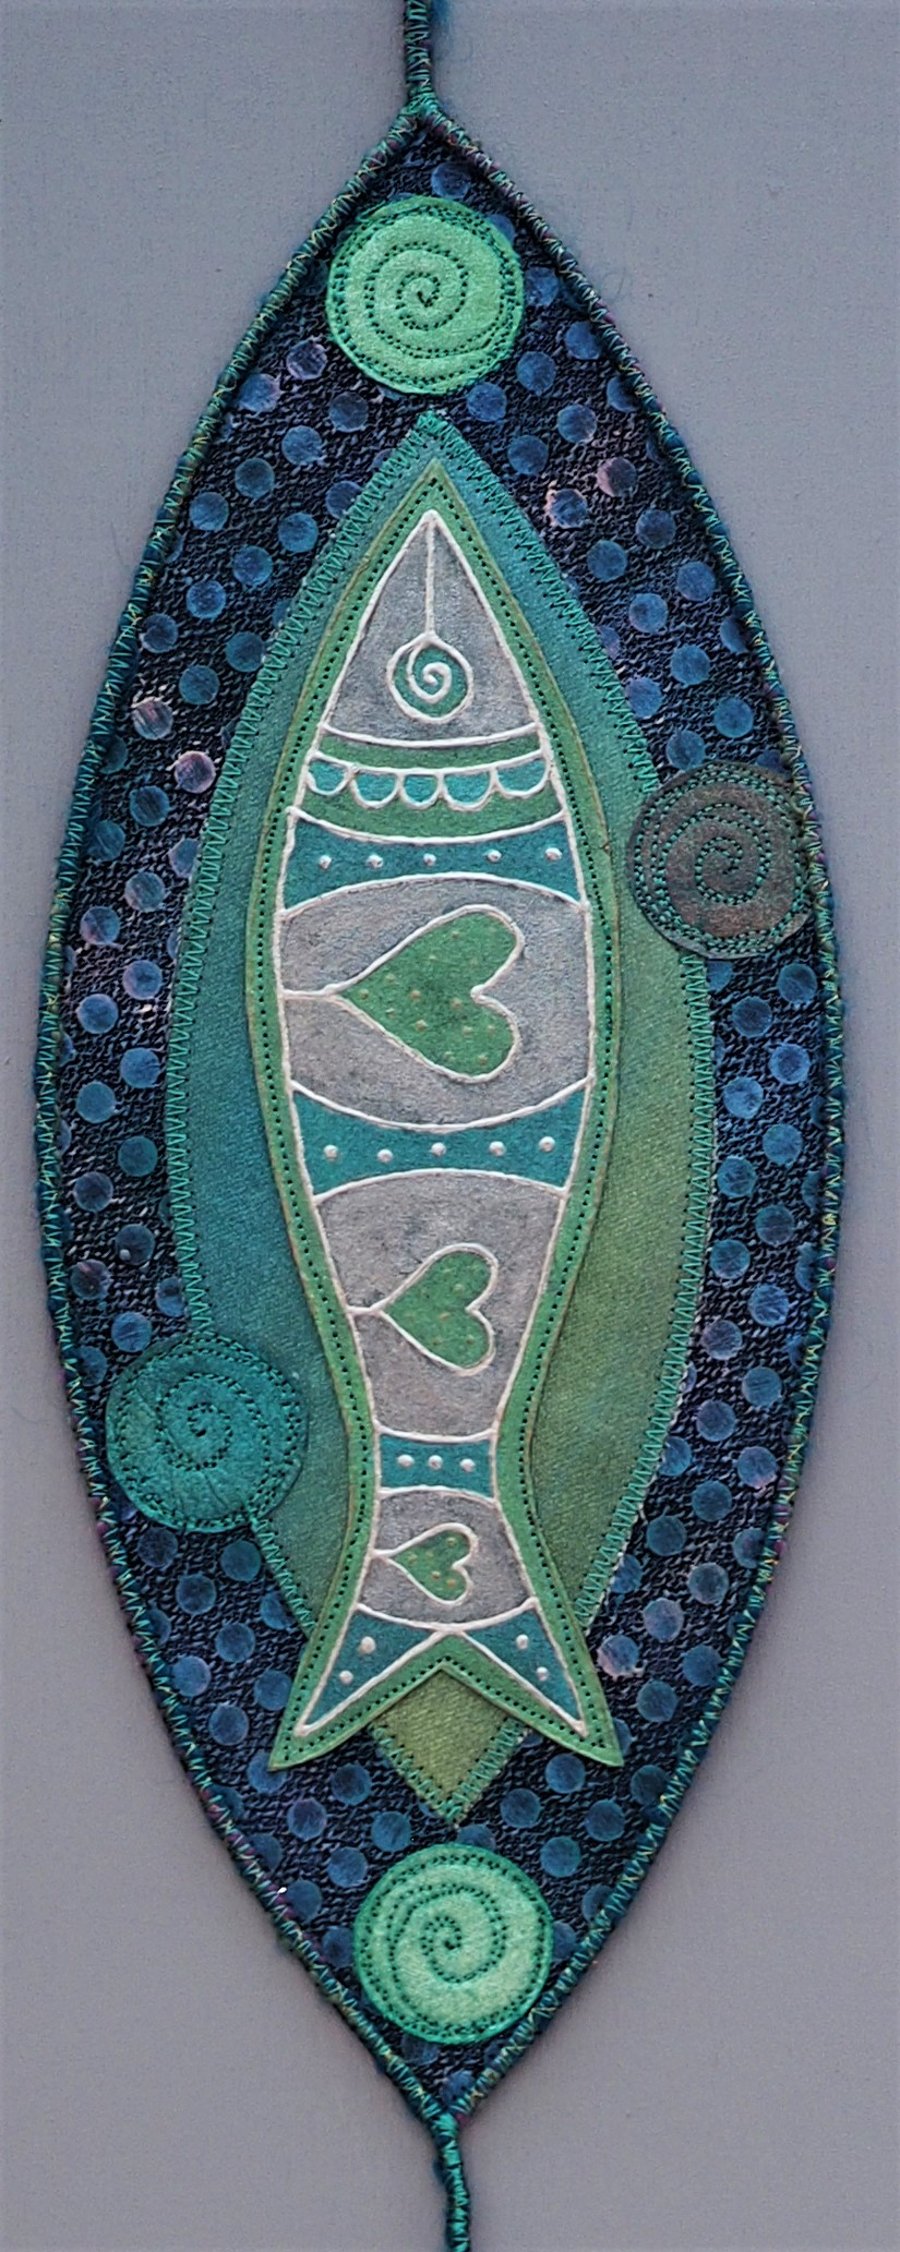 FSP007 - Fish Shield Wallhanging - pewter - green - blue - 30cm (12")